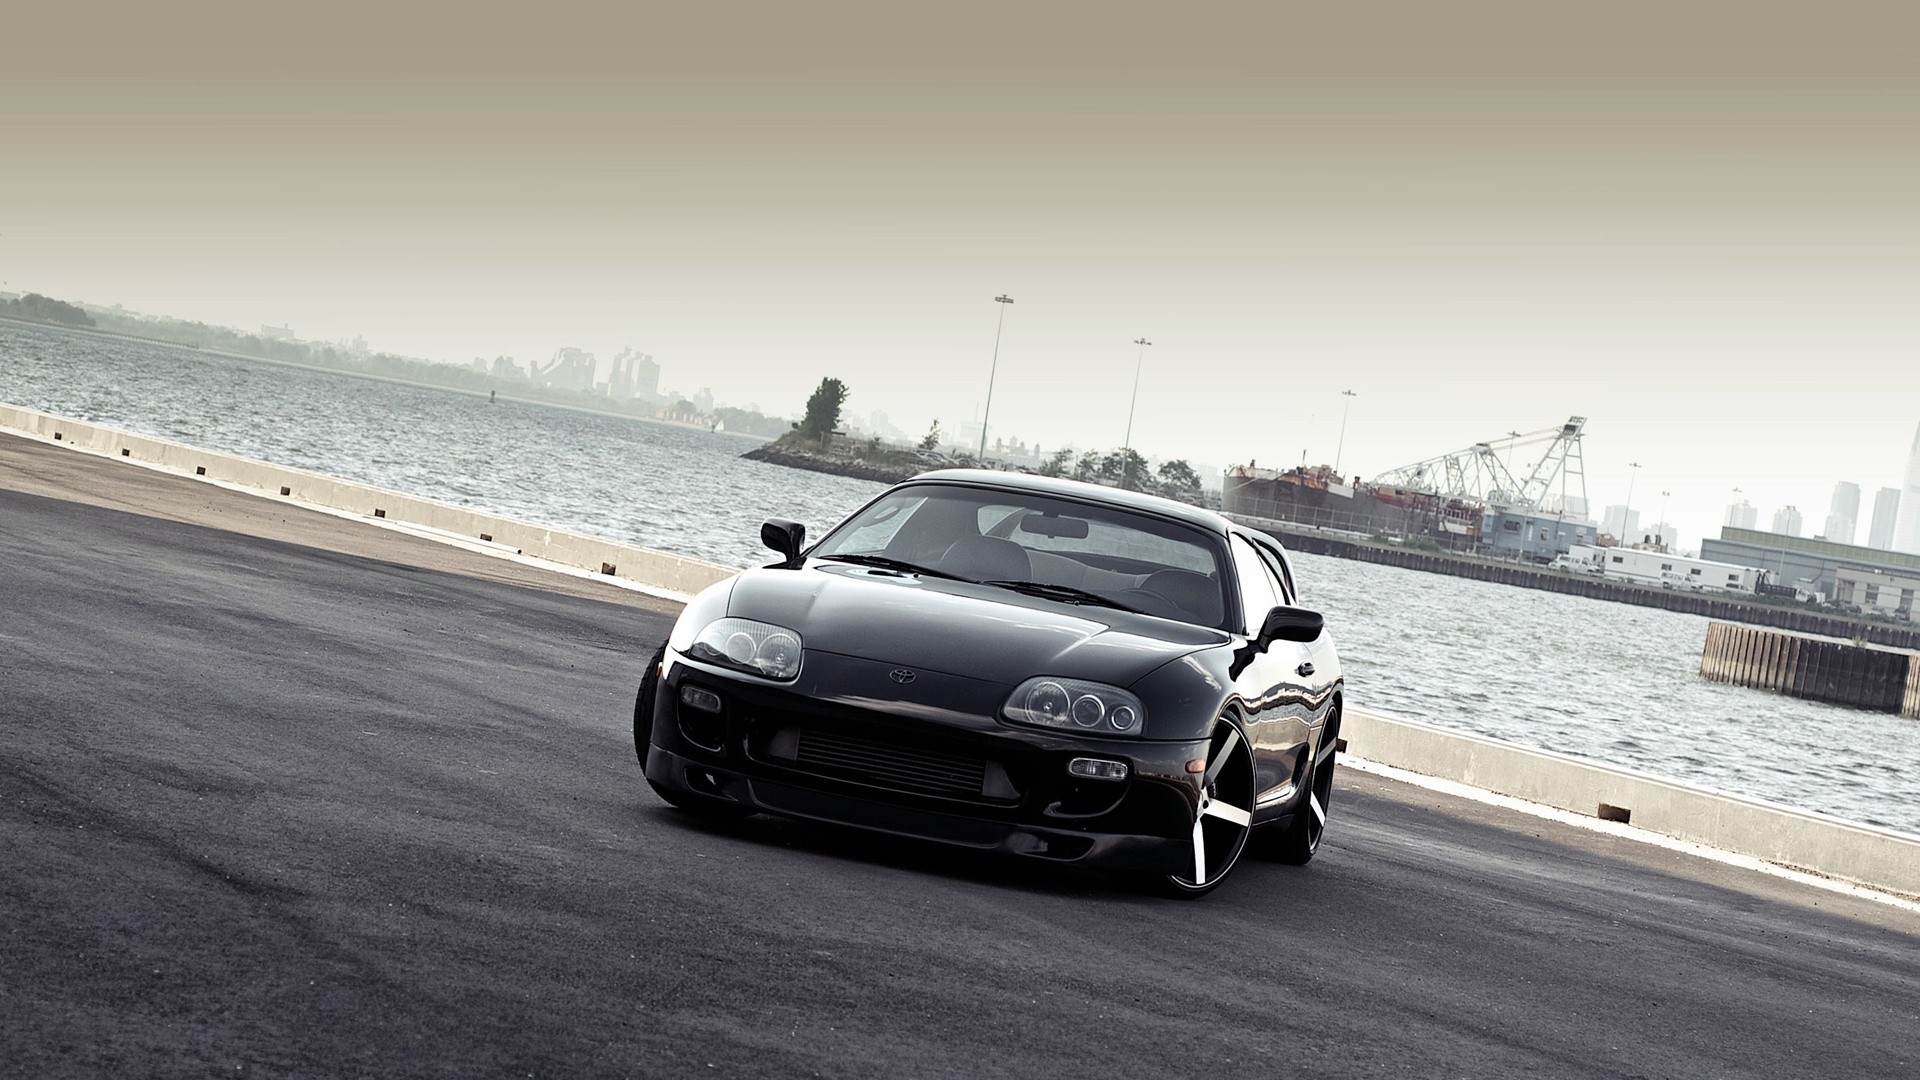 1920x1080 Black red dock cars sports Toyota outdoors vehicles supercars turbo Toyota  Supra automotive automobiles exotic cars supra mkIV Toyota Supra Turbo  wallpaper ...